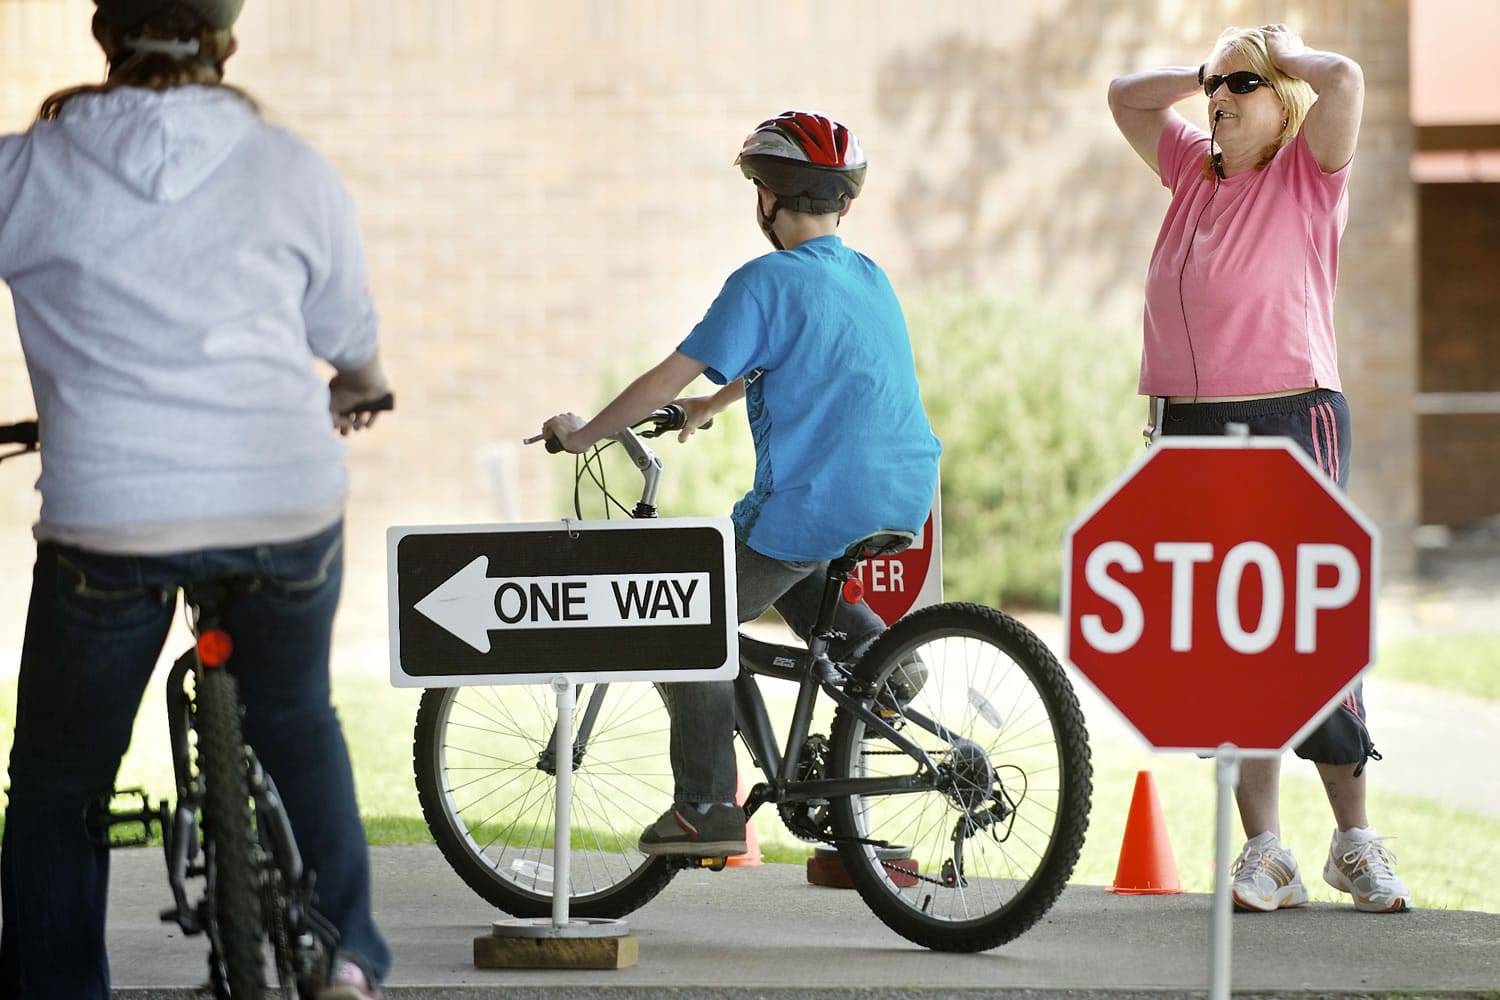 Stephanie Vanveen, a physical education teacher at Wy'east Middle School, reacts as Jordan Hornbeck, 13, fails to yield and signal during a bicycle safety class at the school Thursday. The class was part of a two-week unit teaching middle-schoolers hand signals, the rules of the road and bicycle safety.